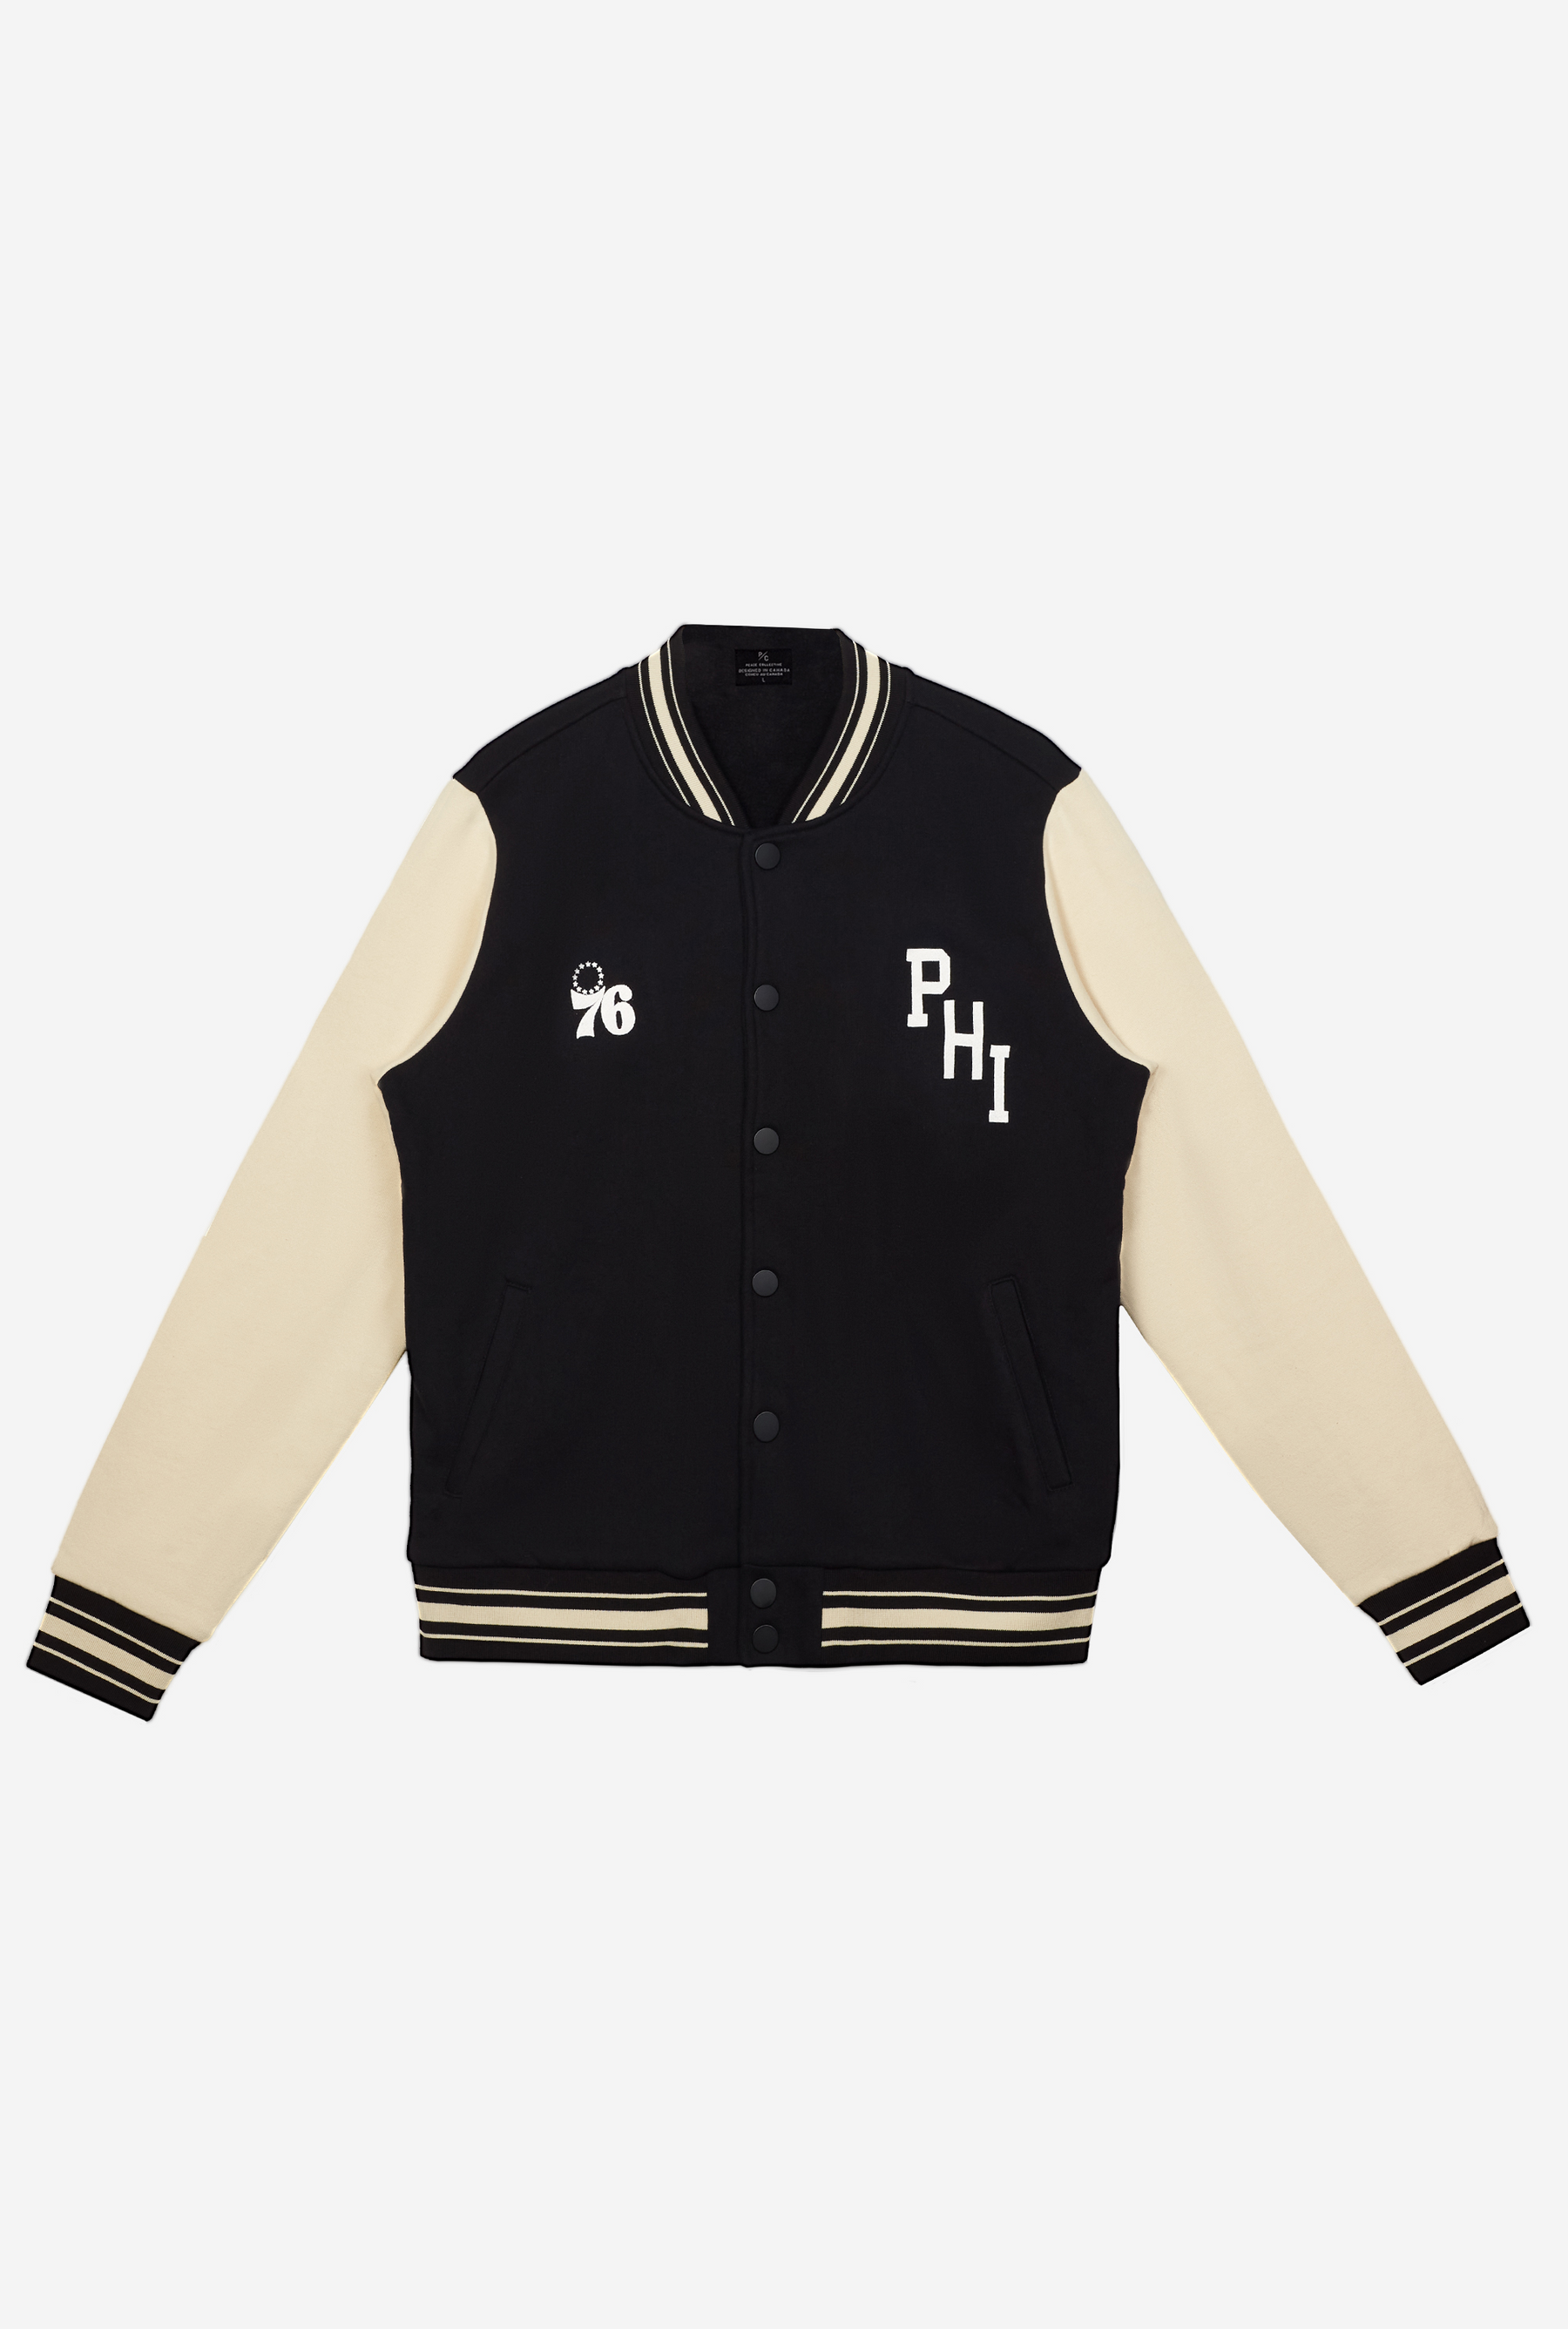 Basketball Lives in Philly Letterman Jacket - Black/Cream